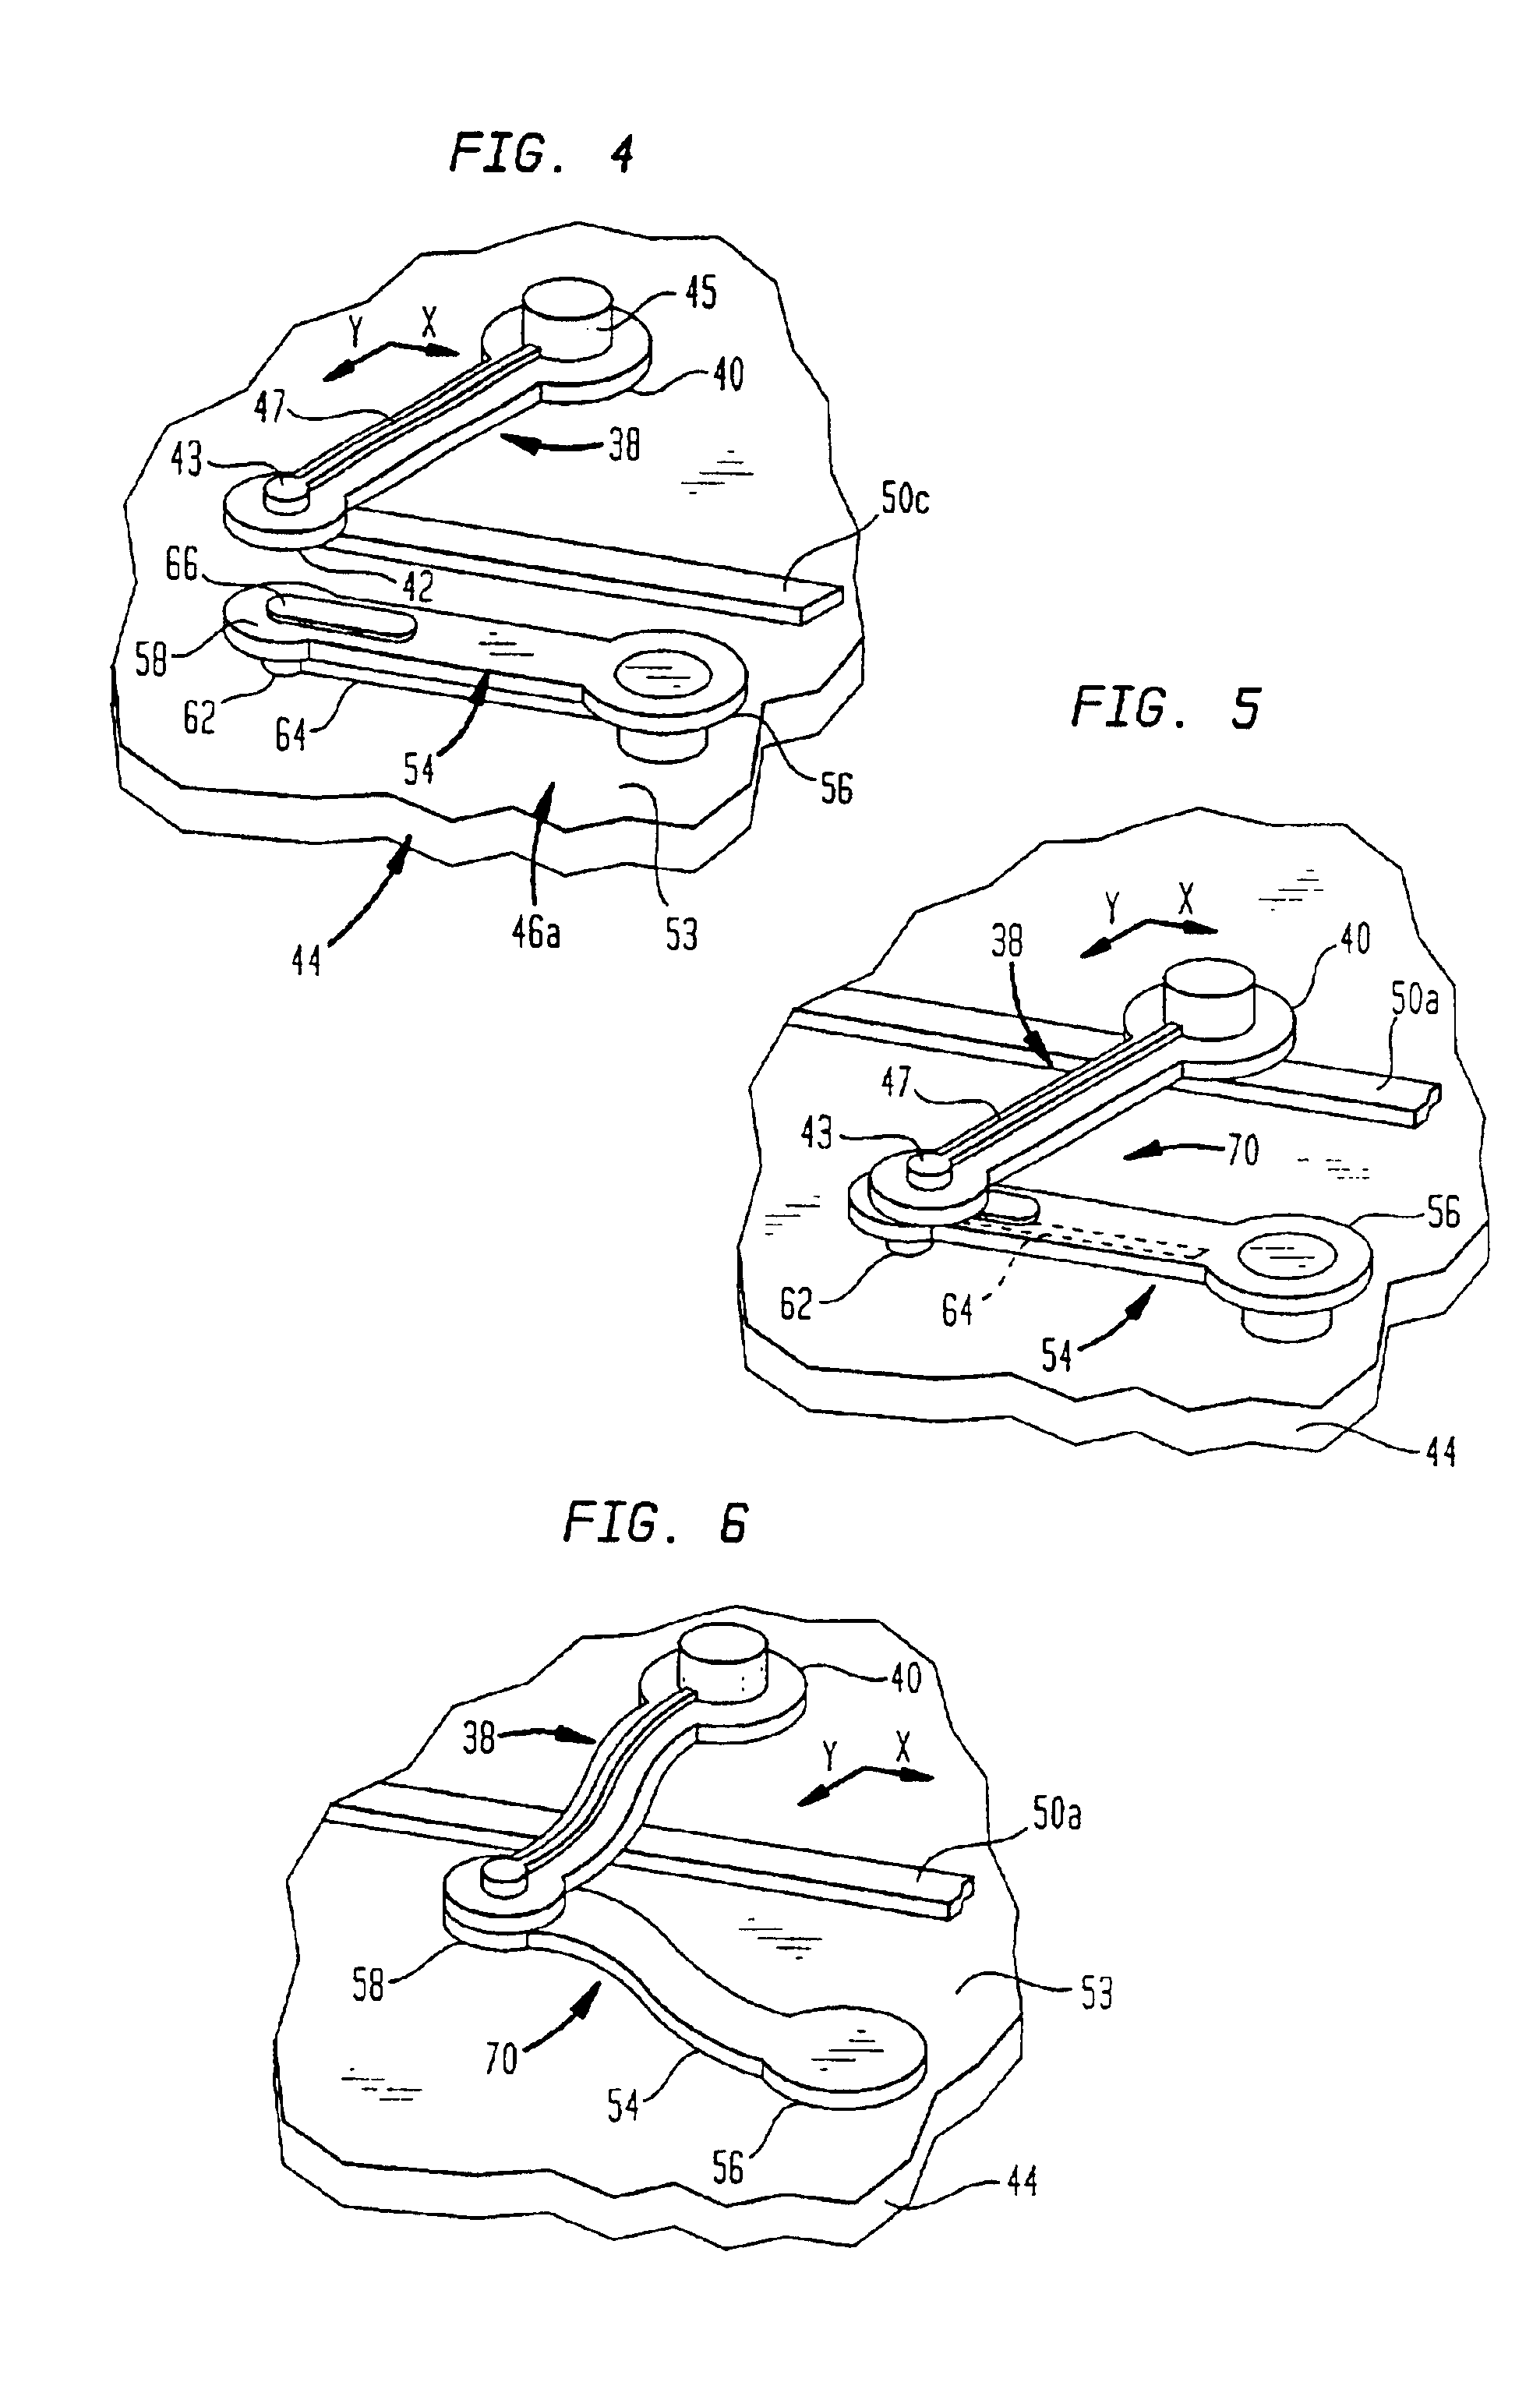 Multi-layer substrates and fabrication processes